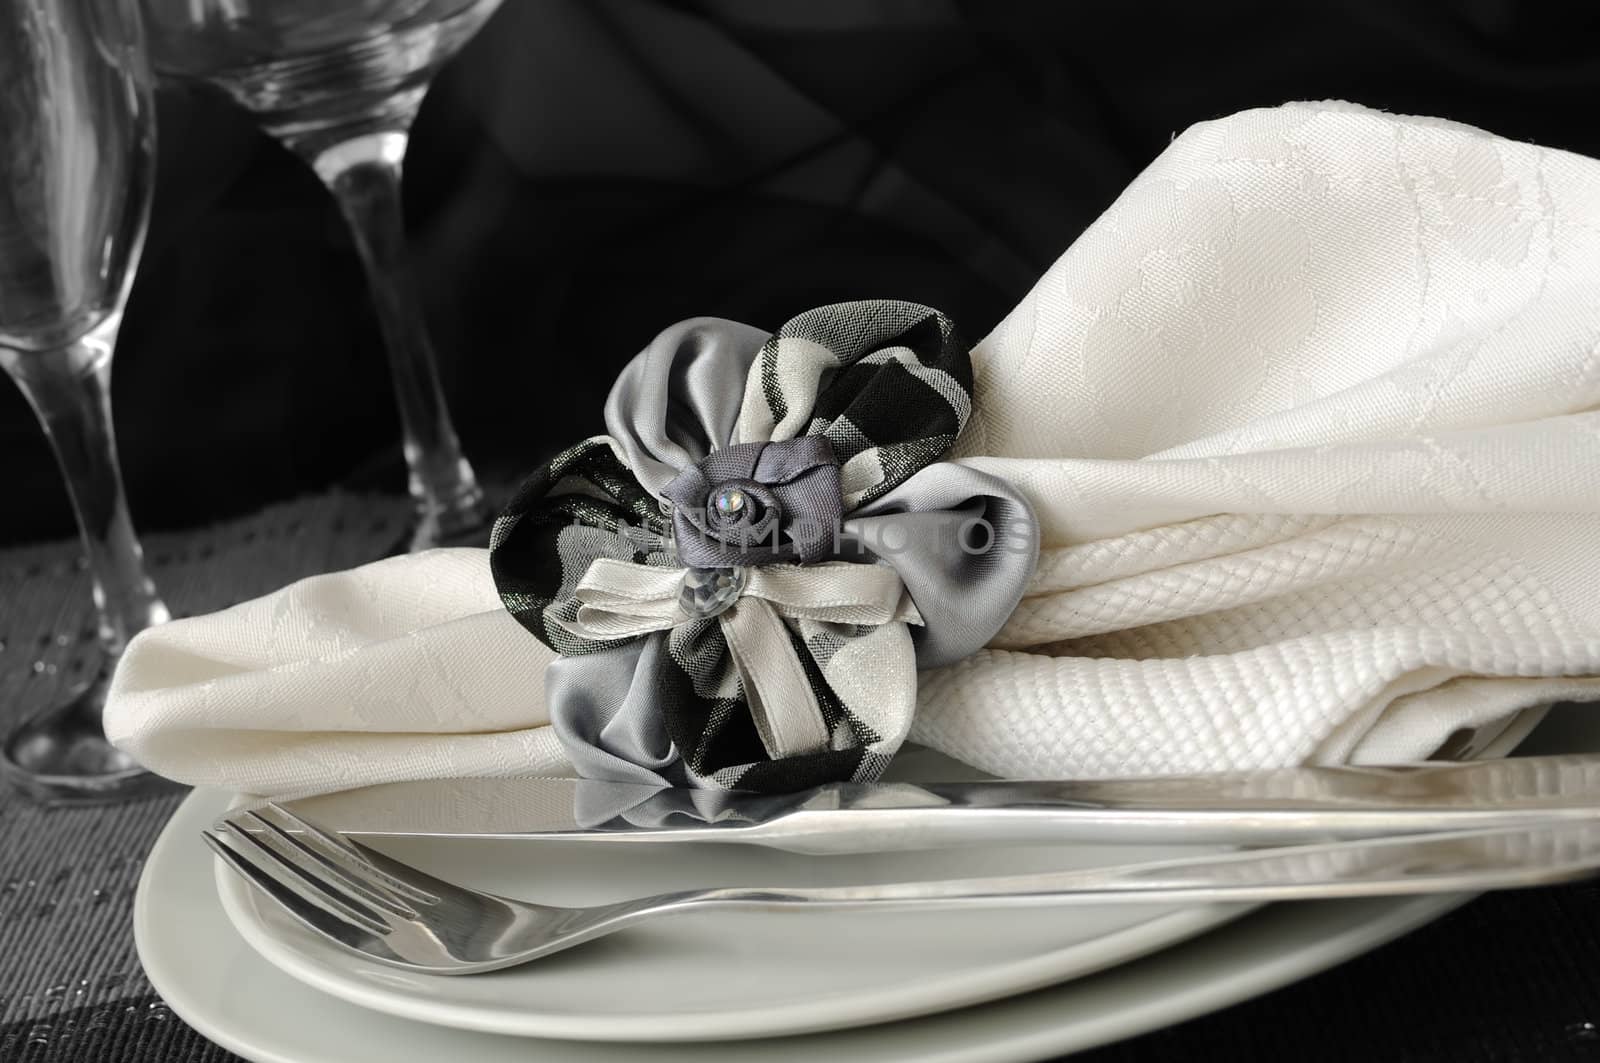 Decorative folded napkin with a clamp in the shape of a flower on a plate with cutlery